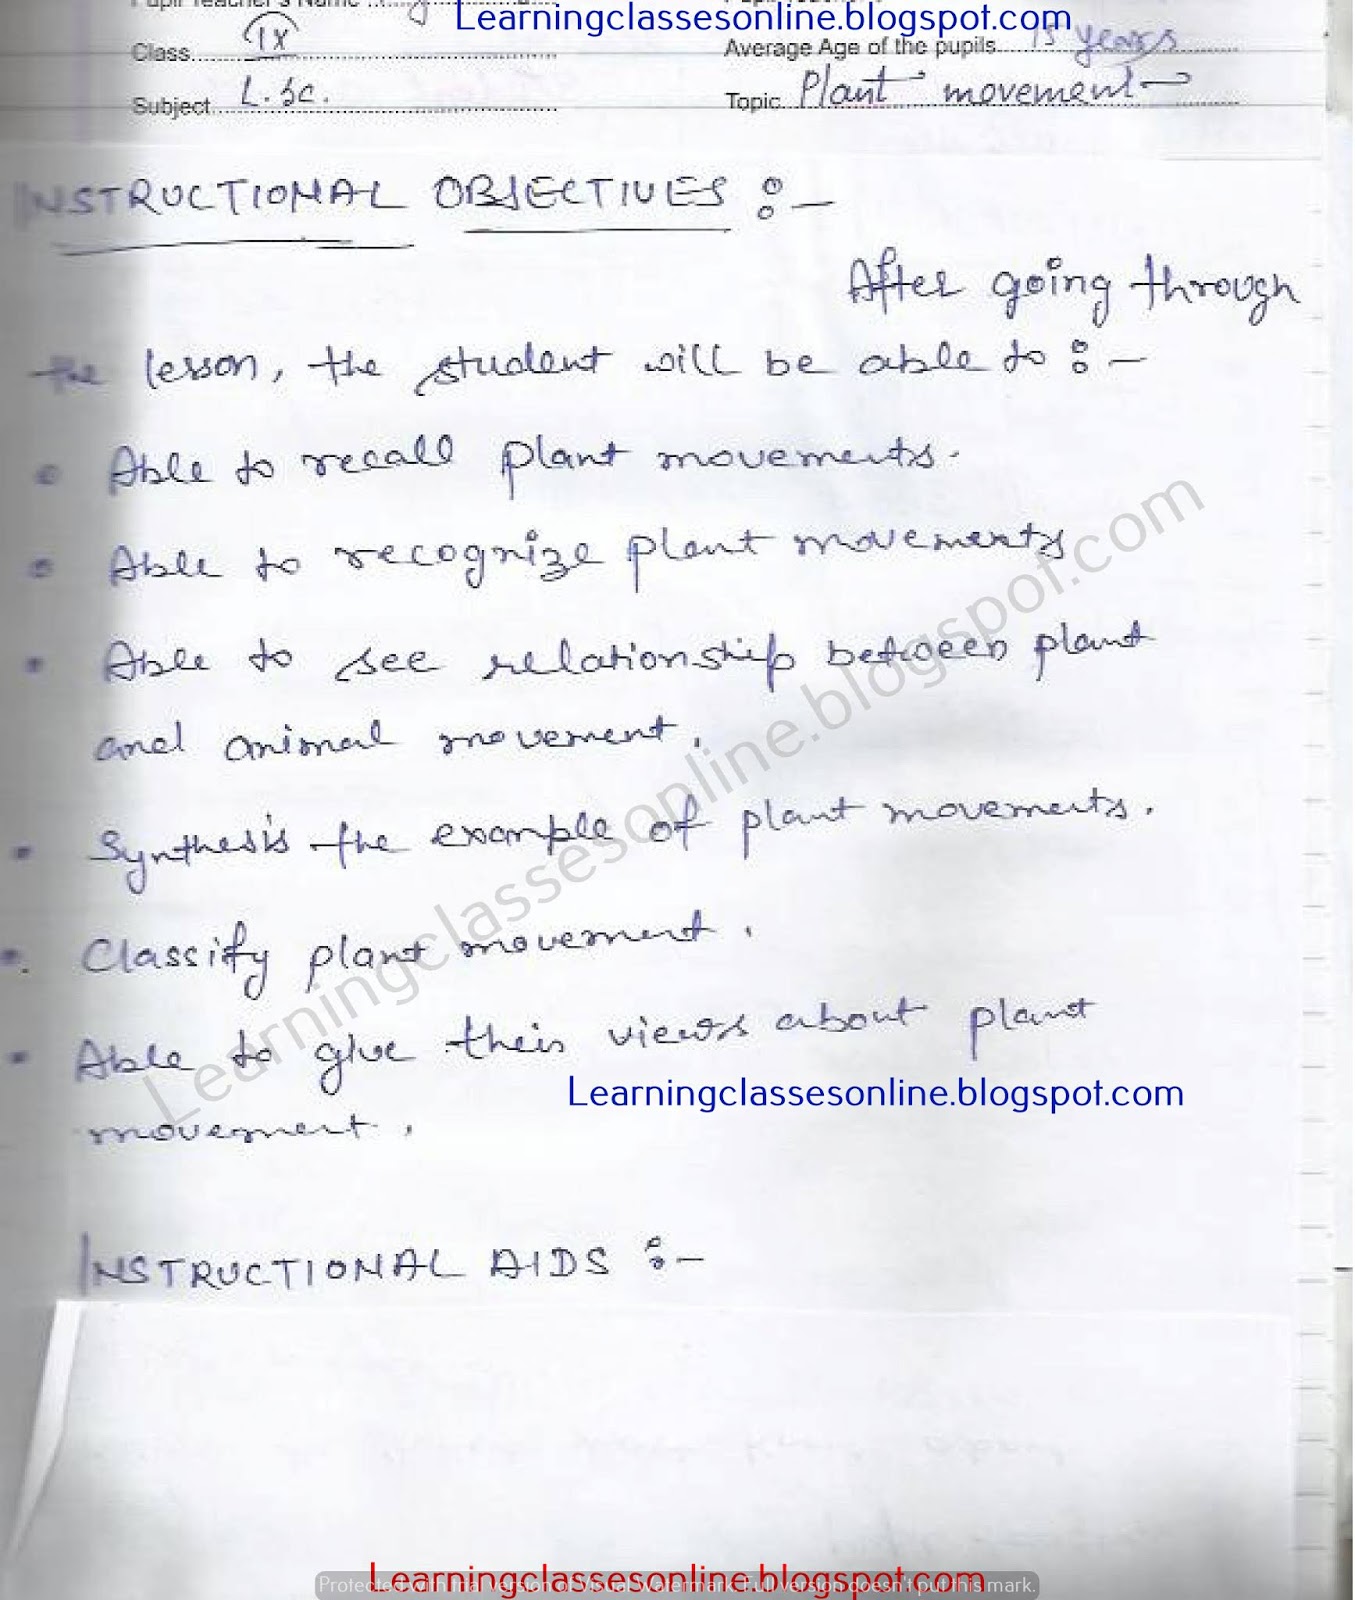 Class 10th science and biological science lesson plan for teachers on plant movement